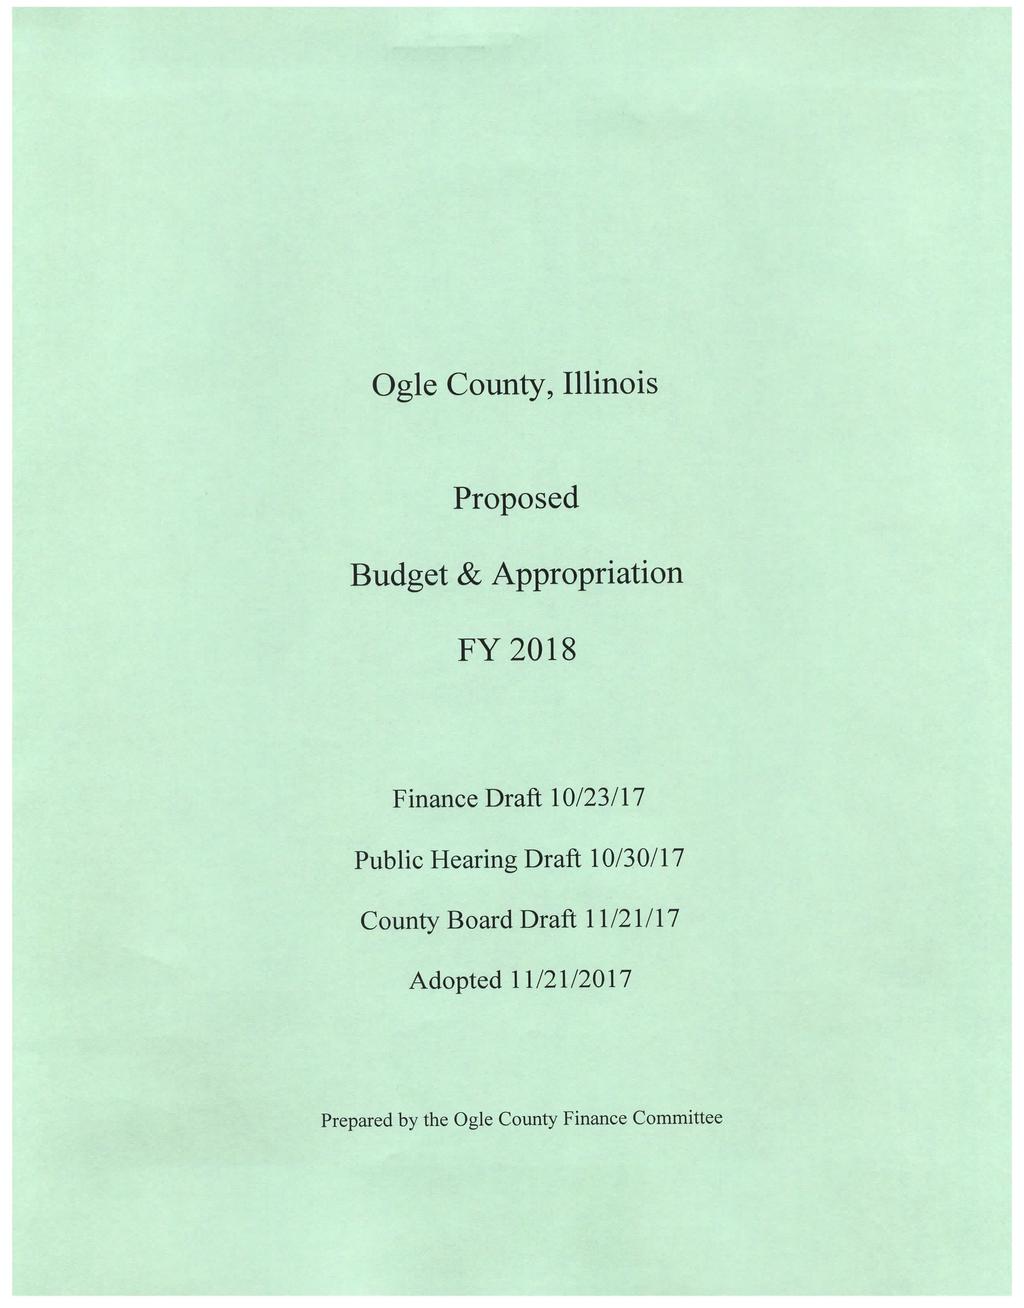 , Illinois Proposed Budget & Appropriation FY 2018 Finance Draft 10/23/17 Public Hearing